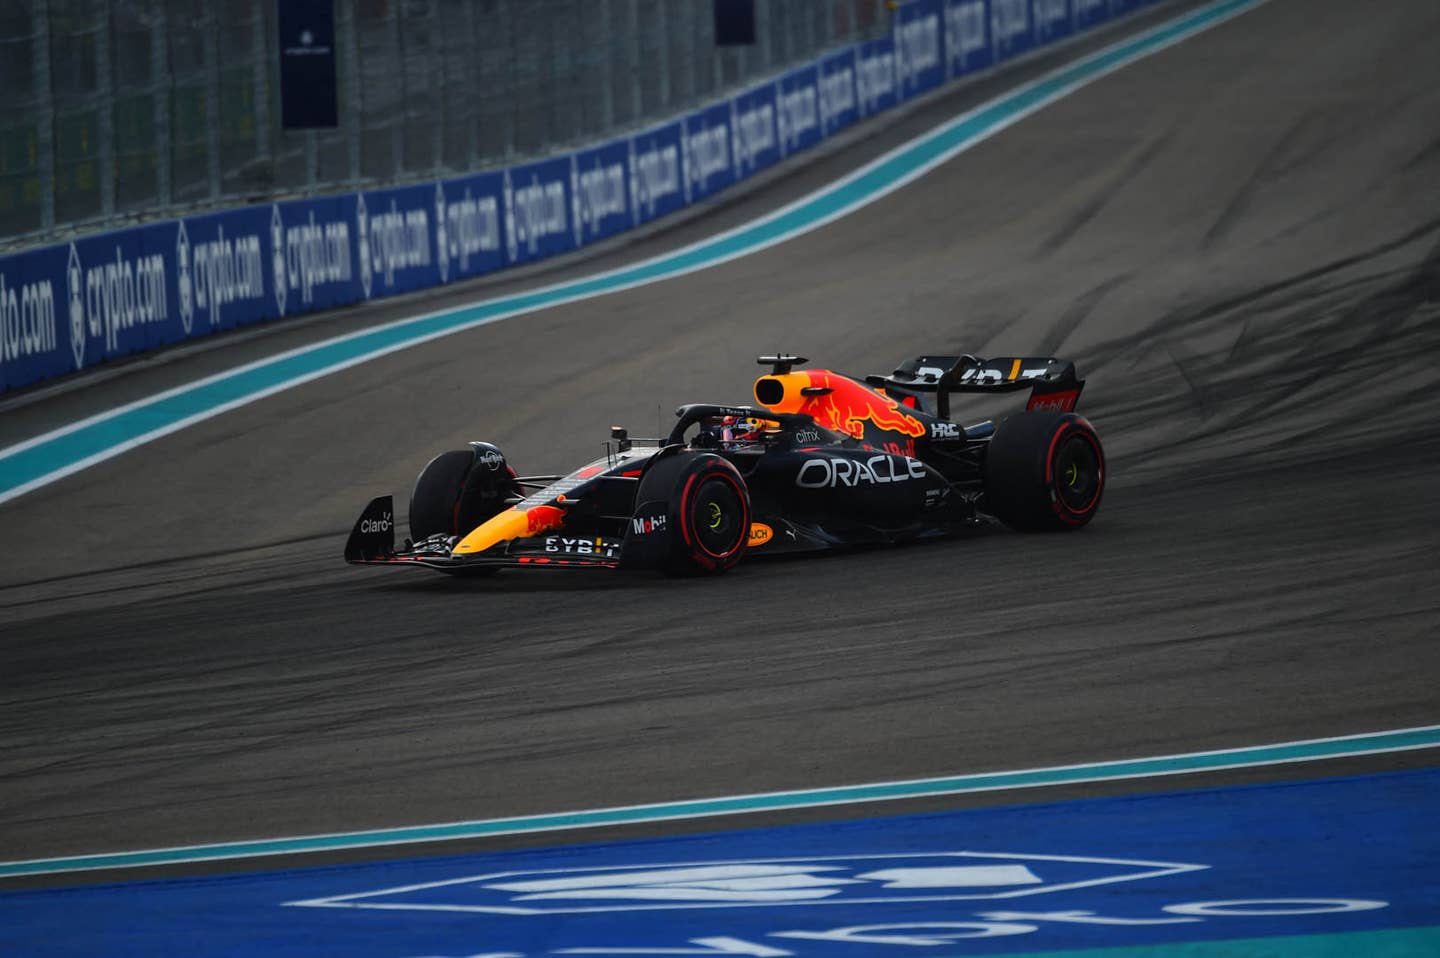 TOPSHOT - Red Bull Racing's Dutch driver Max Verstappen  races during qualifying for the Miami Formula One Grand Prix at the Miami International Autodrome in Miami Gardens, Florida, on May 7, 2022. (Photo by Chandan Khanna / AFP) (Photo by CHANDAN KHANNA/AFP via Getty Images)